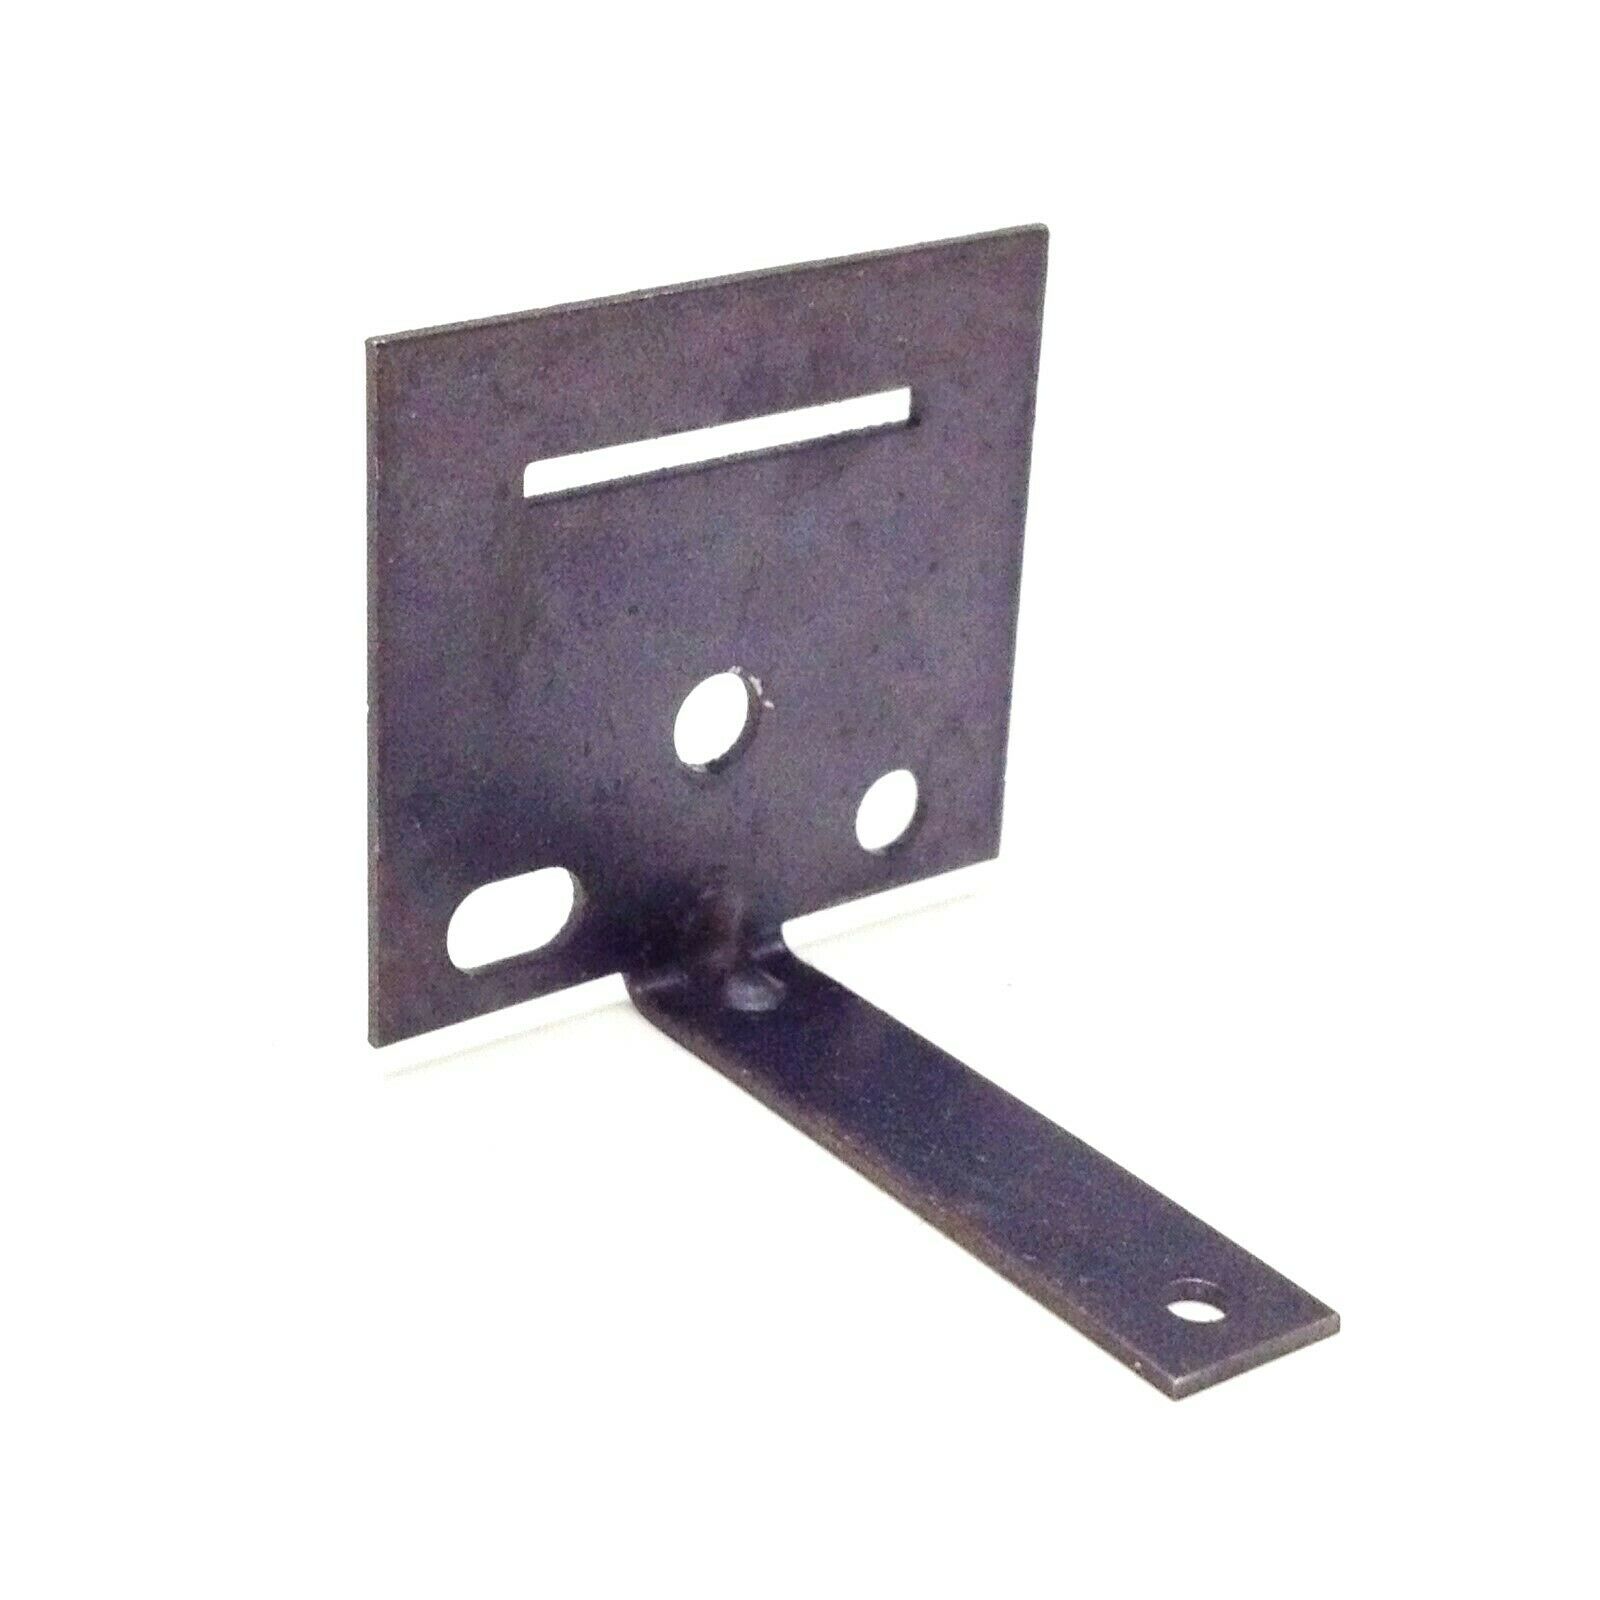 American Flyer S Parts By Lionel - Ejector Lever Bracket 2321-151 New Old Stock